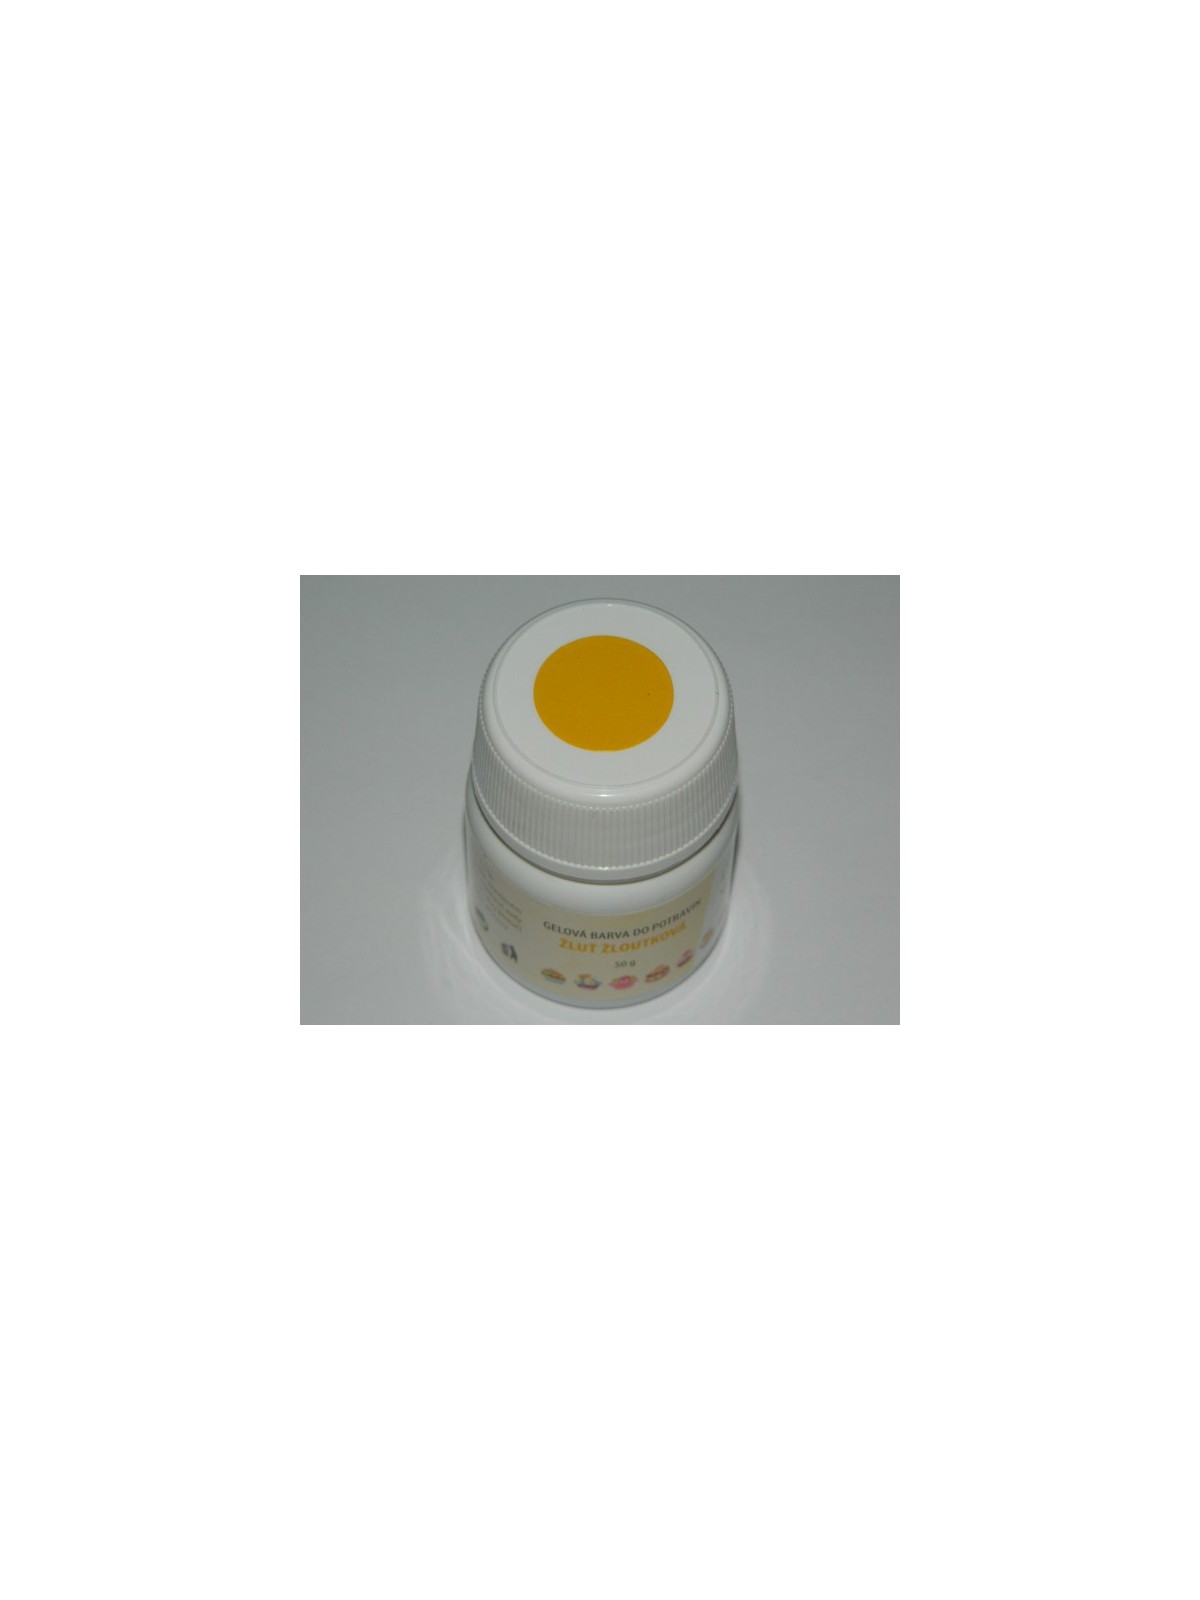 Gel color to food - yellow egg - 50g